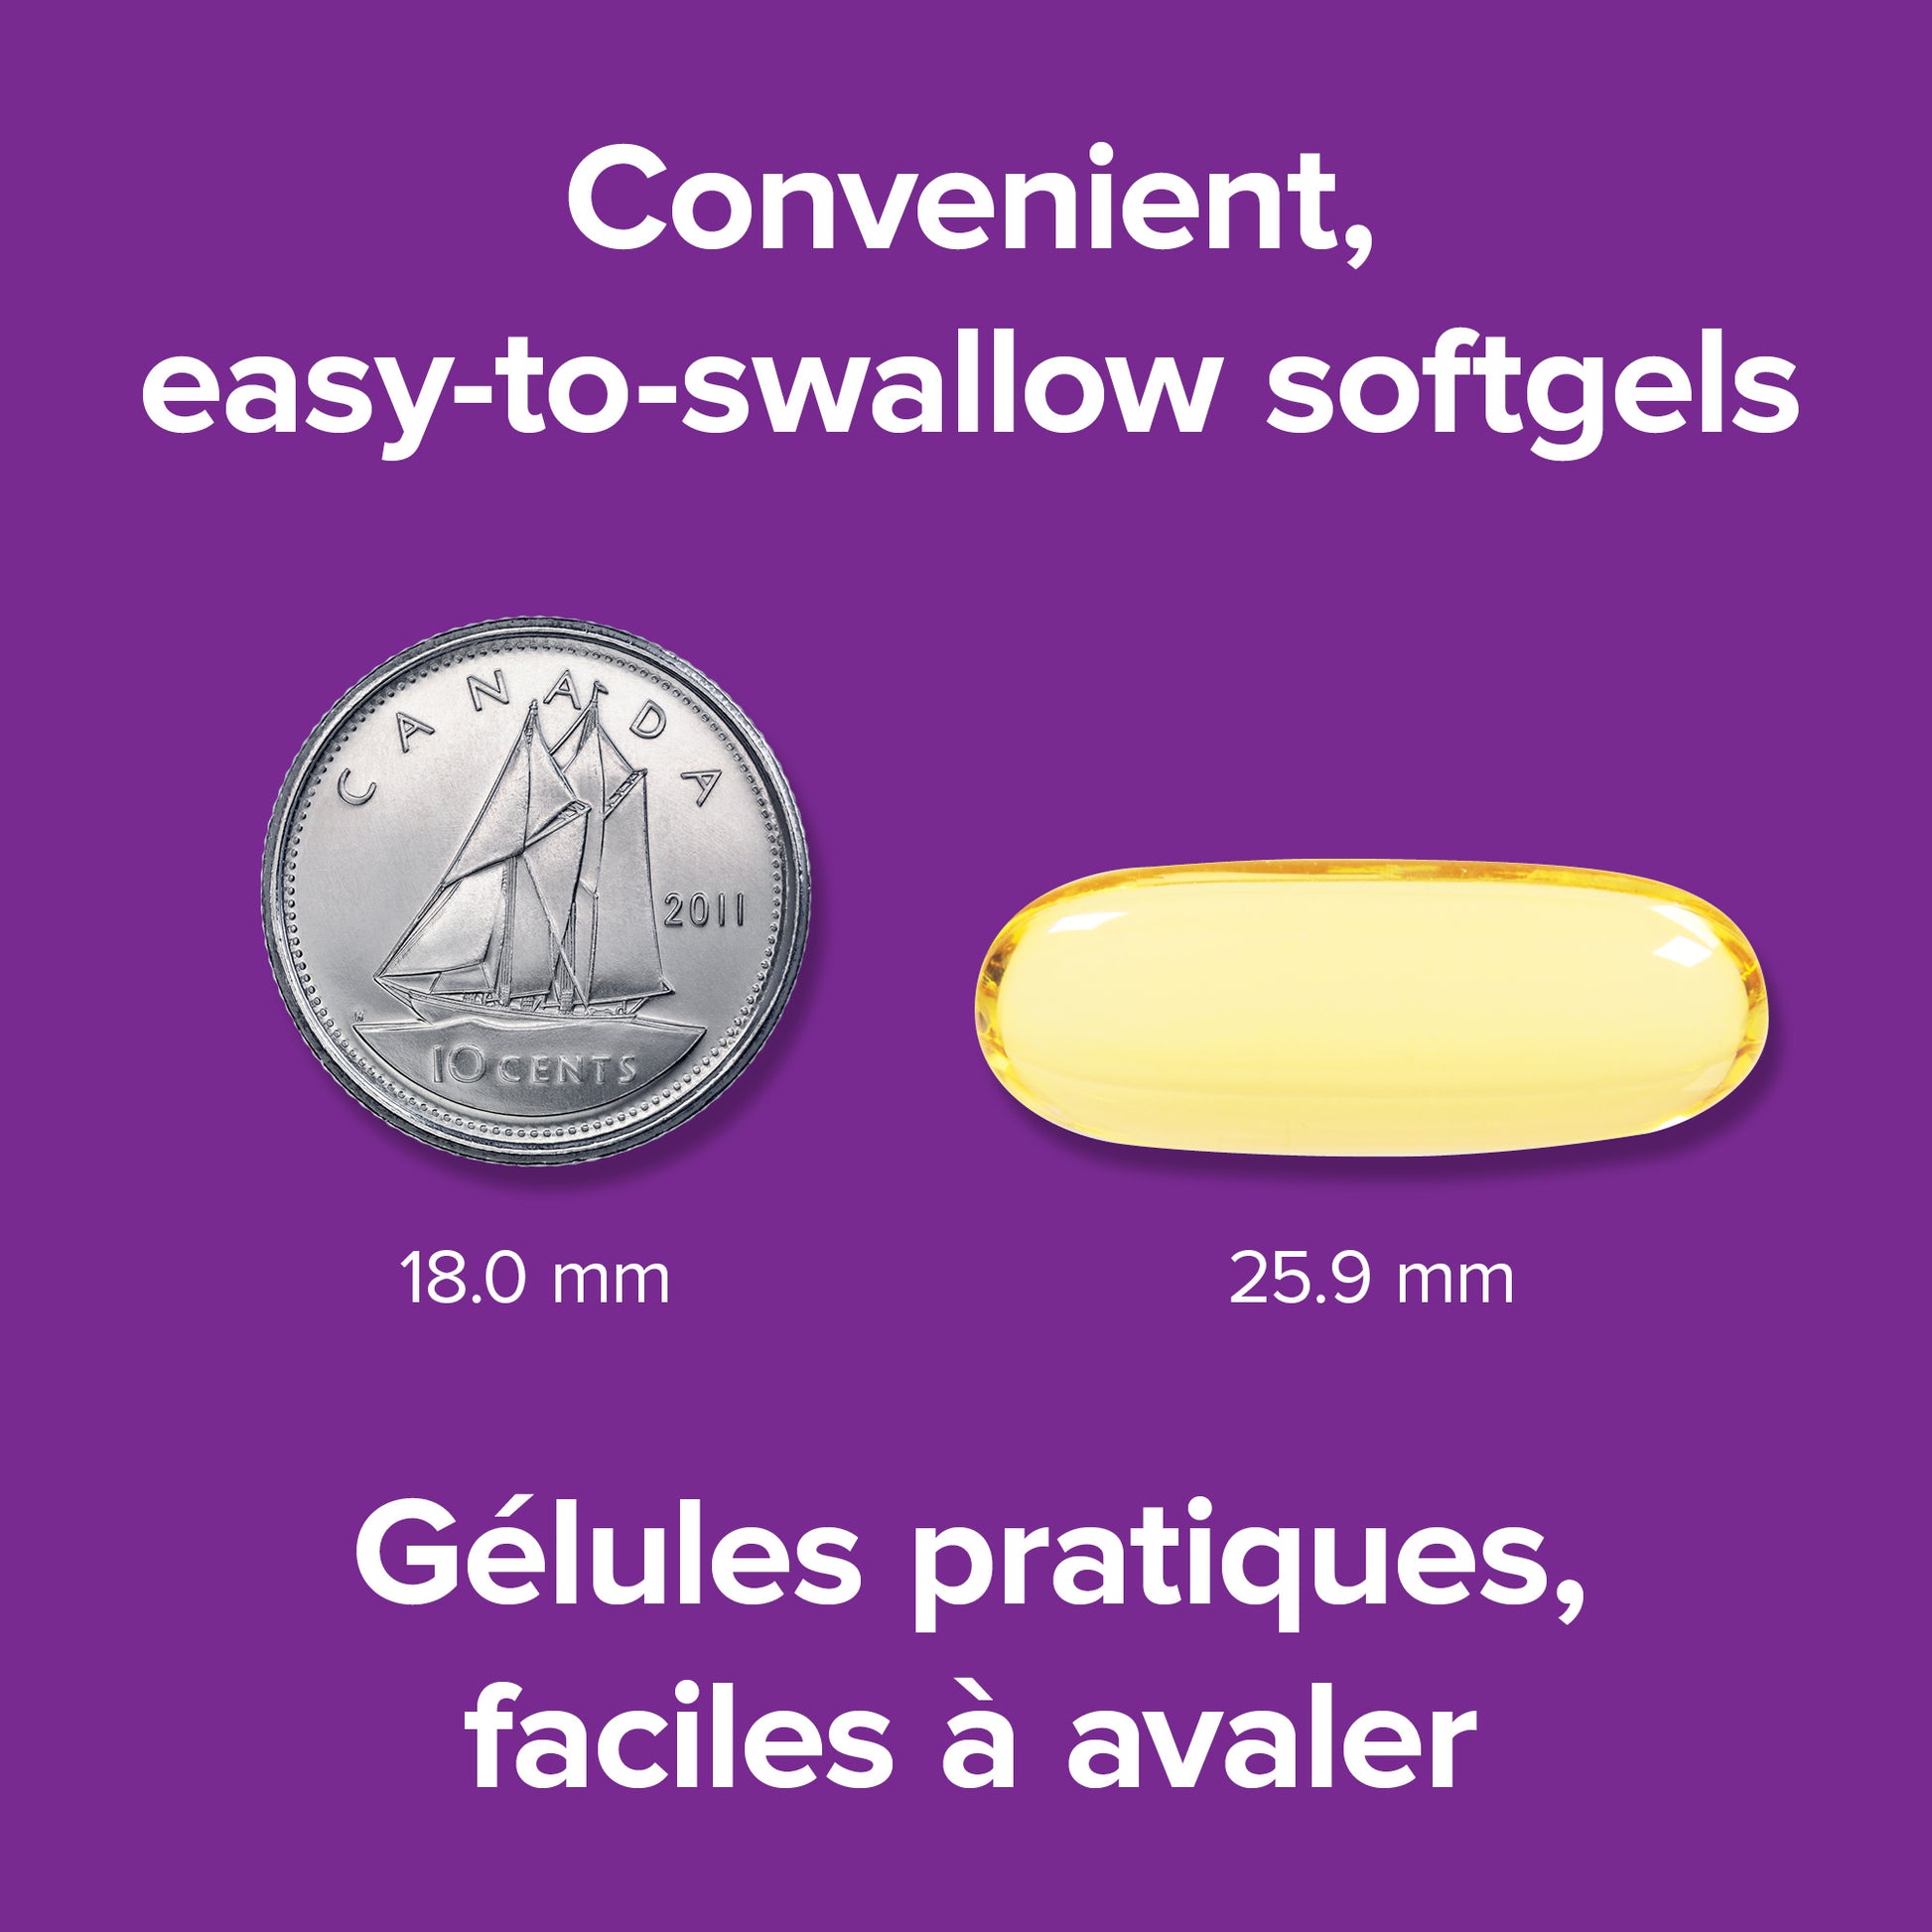 specifications-Oméga-3 Qualité pharmaceutique 500 mg AEP/ADH for Webber Naturals